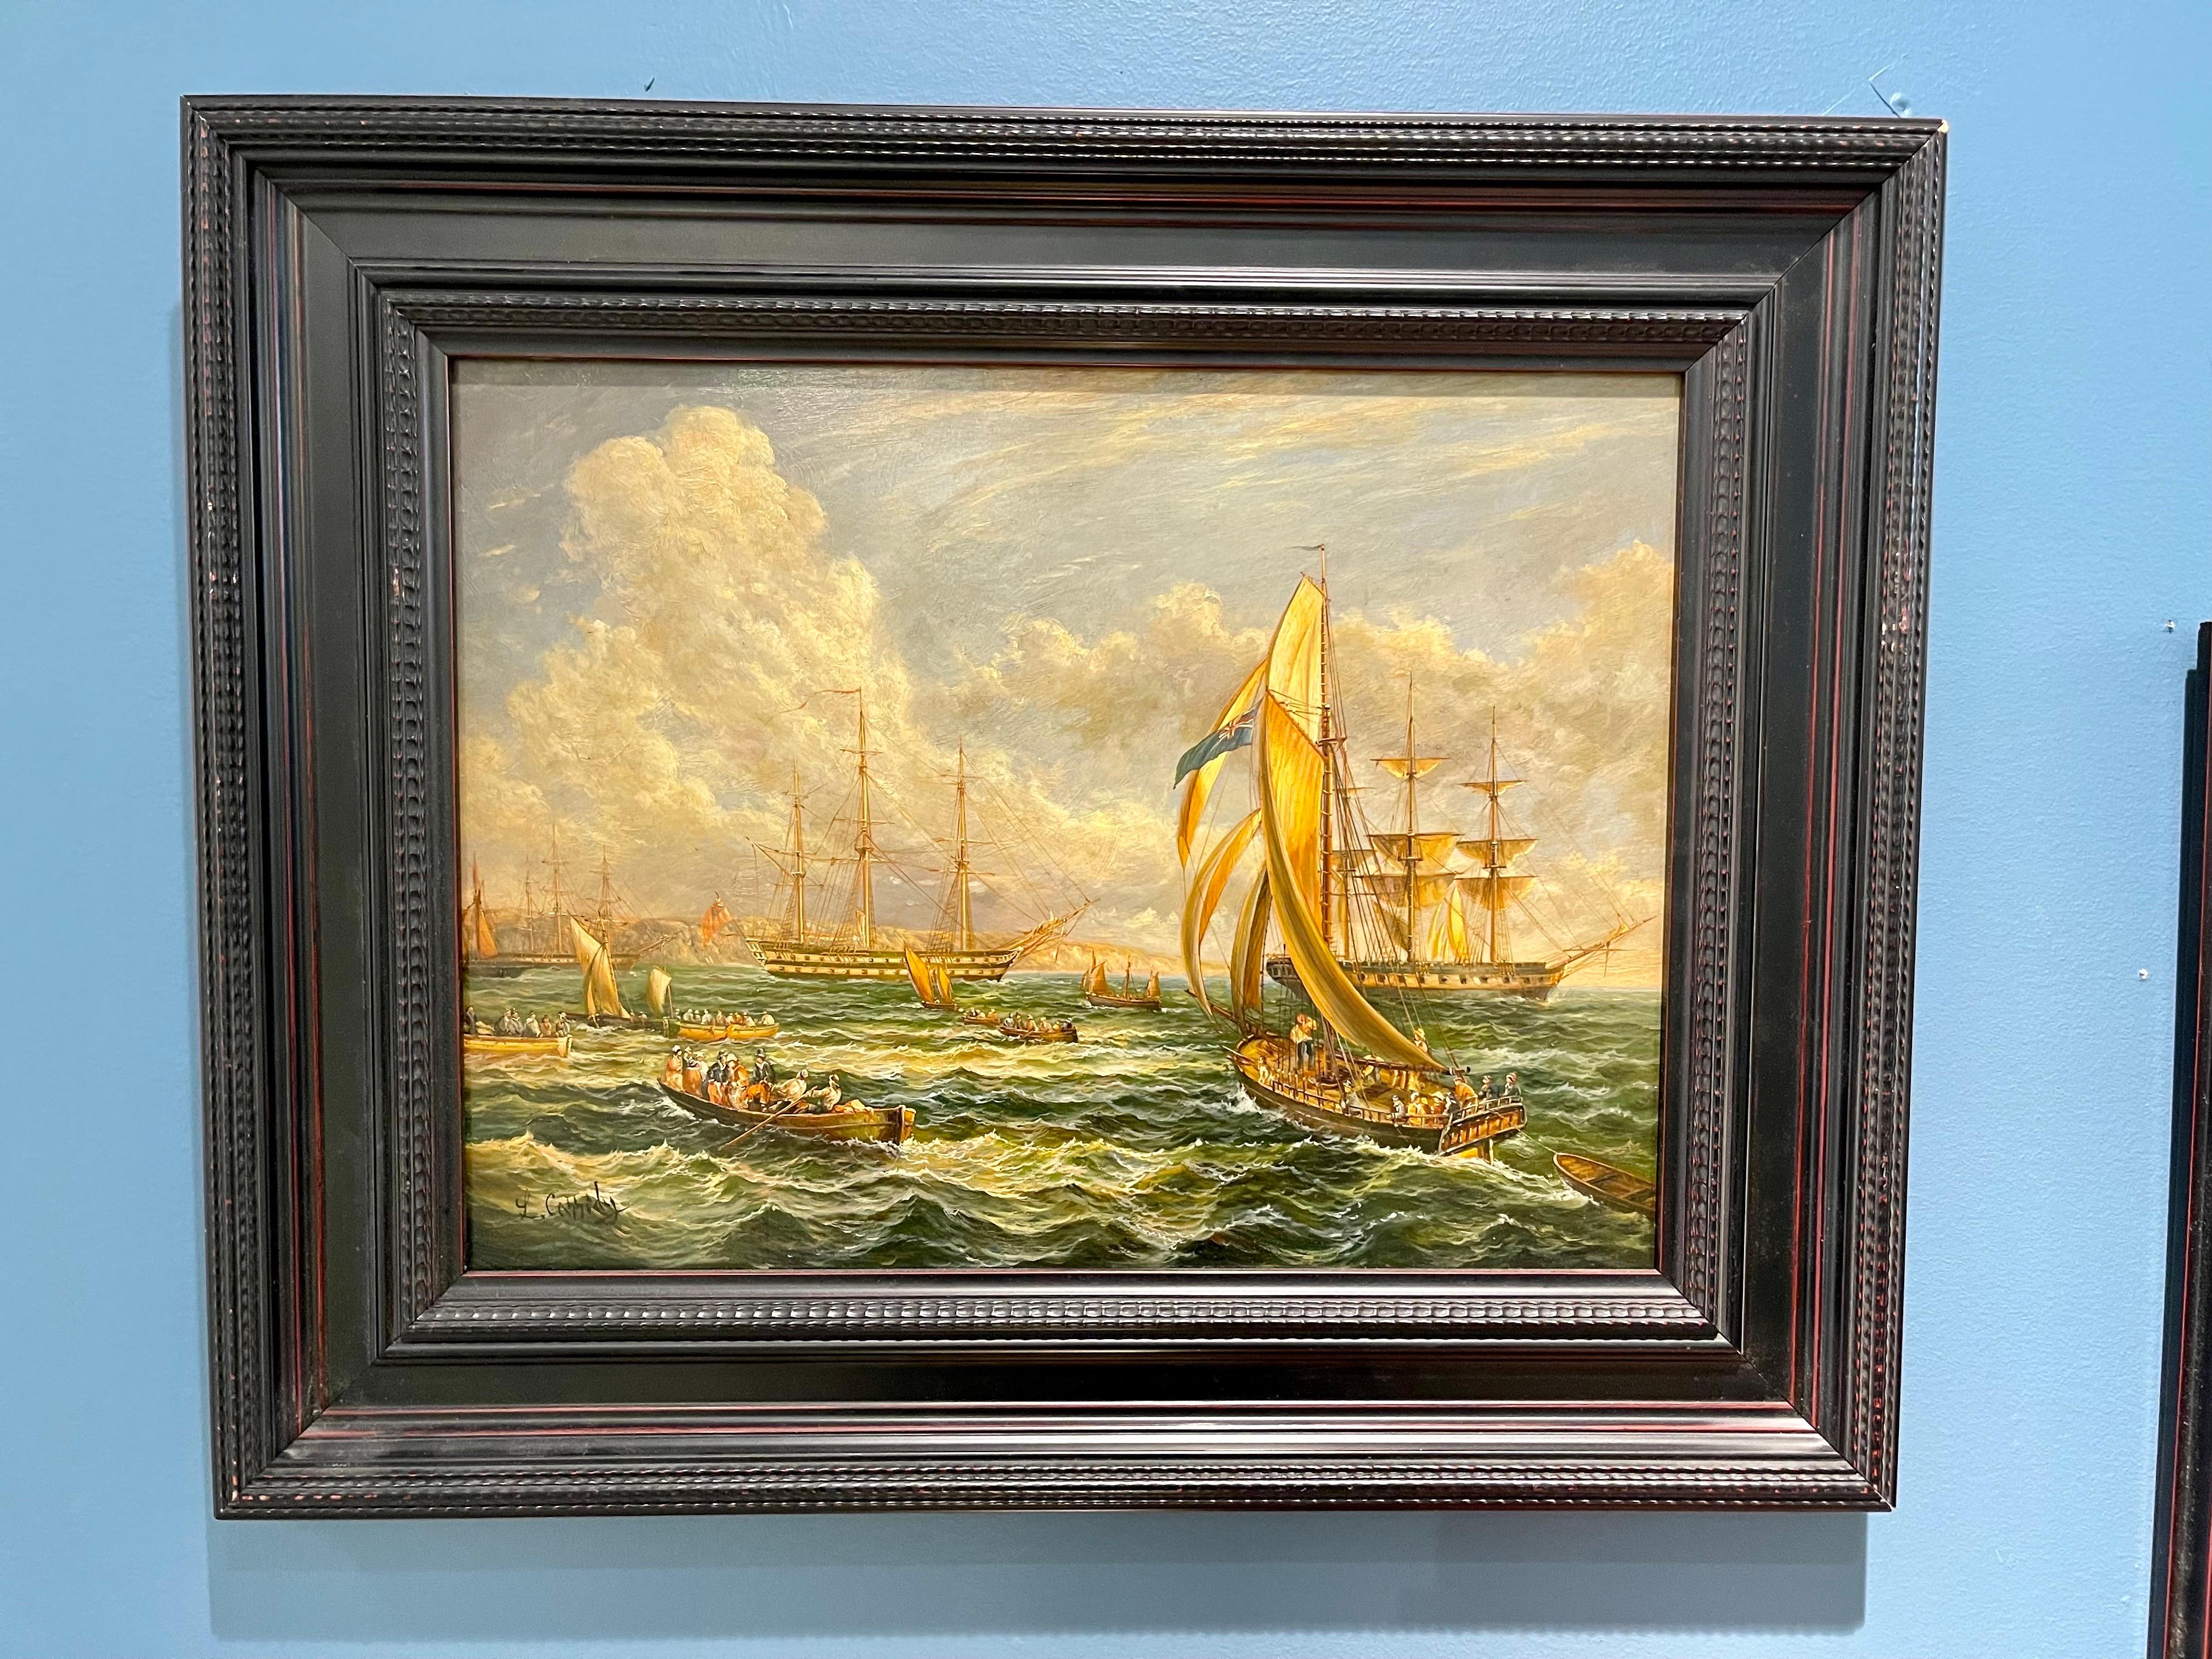 Elegant signed L. Cassidy oil on board framed. Artist signature is at bottom.
Gorgeous colors throughout. Dimensions below include frame. The dimensions of just the painting are 16